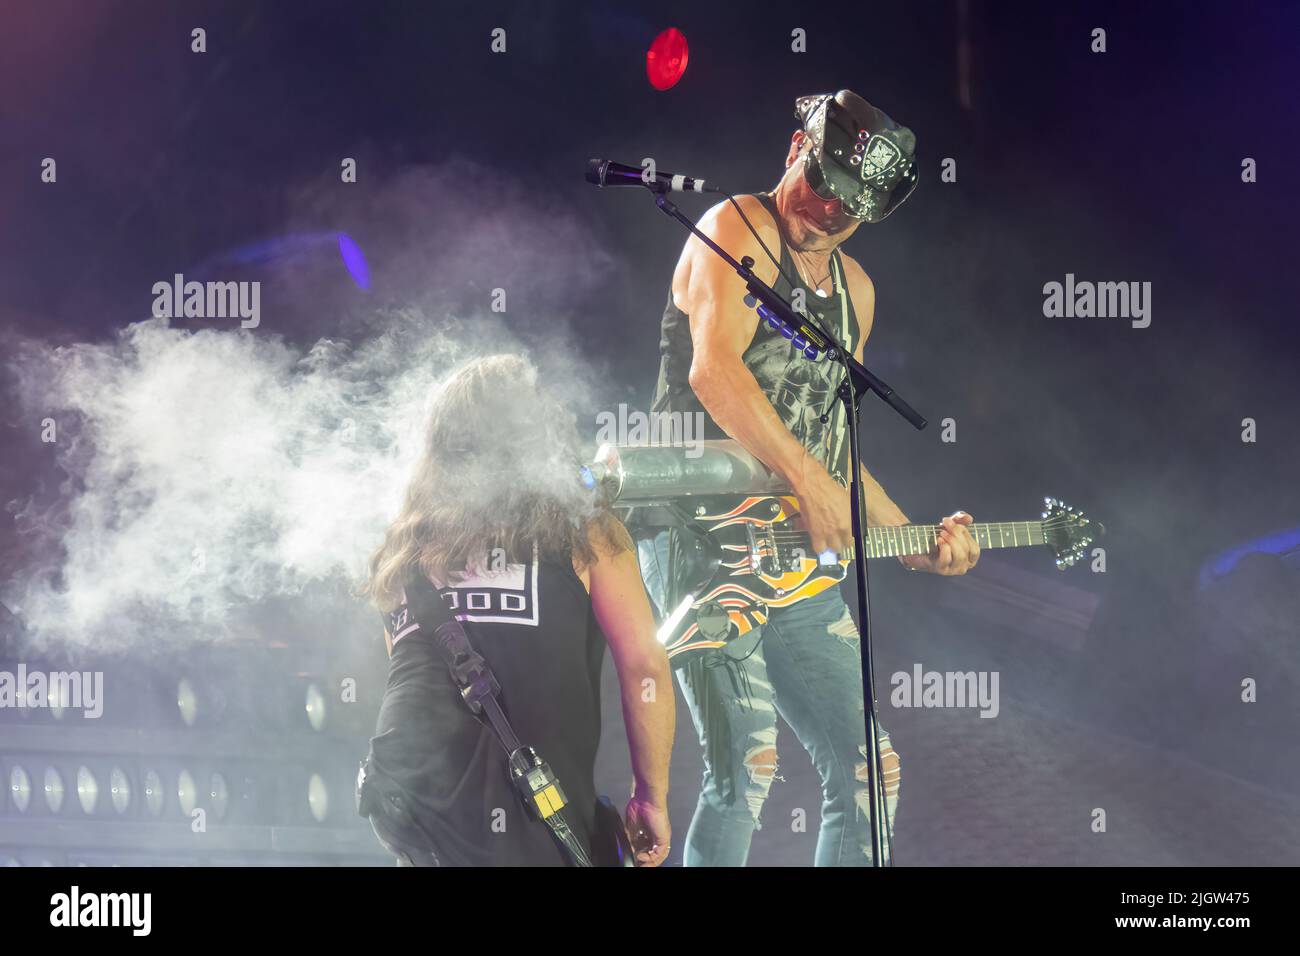 Athens, Greece 6 July 2022. Rudolf Schenker in actions from the show of Scorpions in Greece. Stock Photo